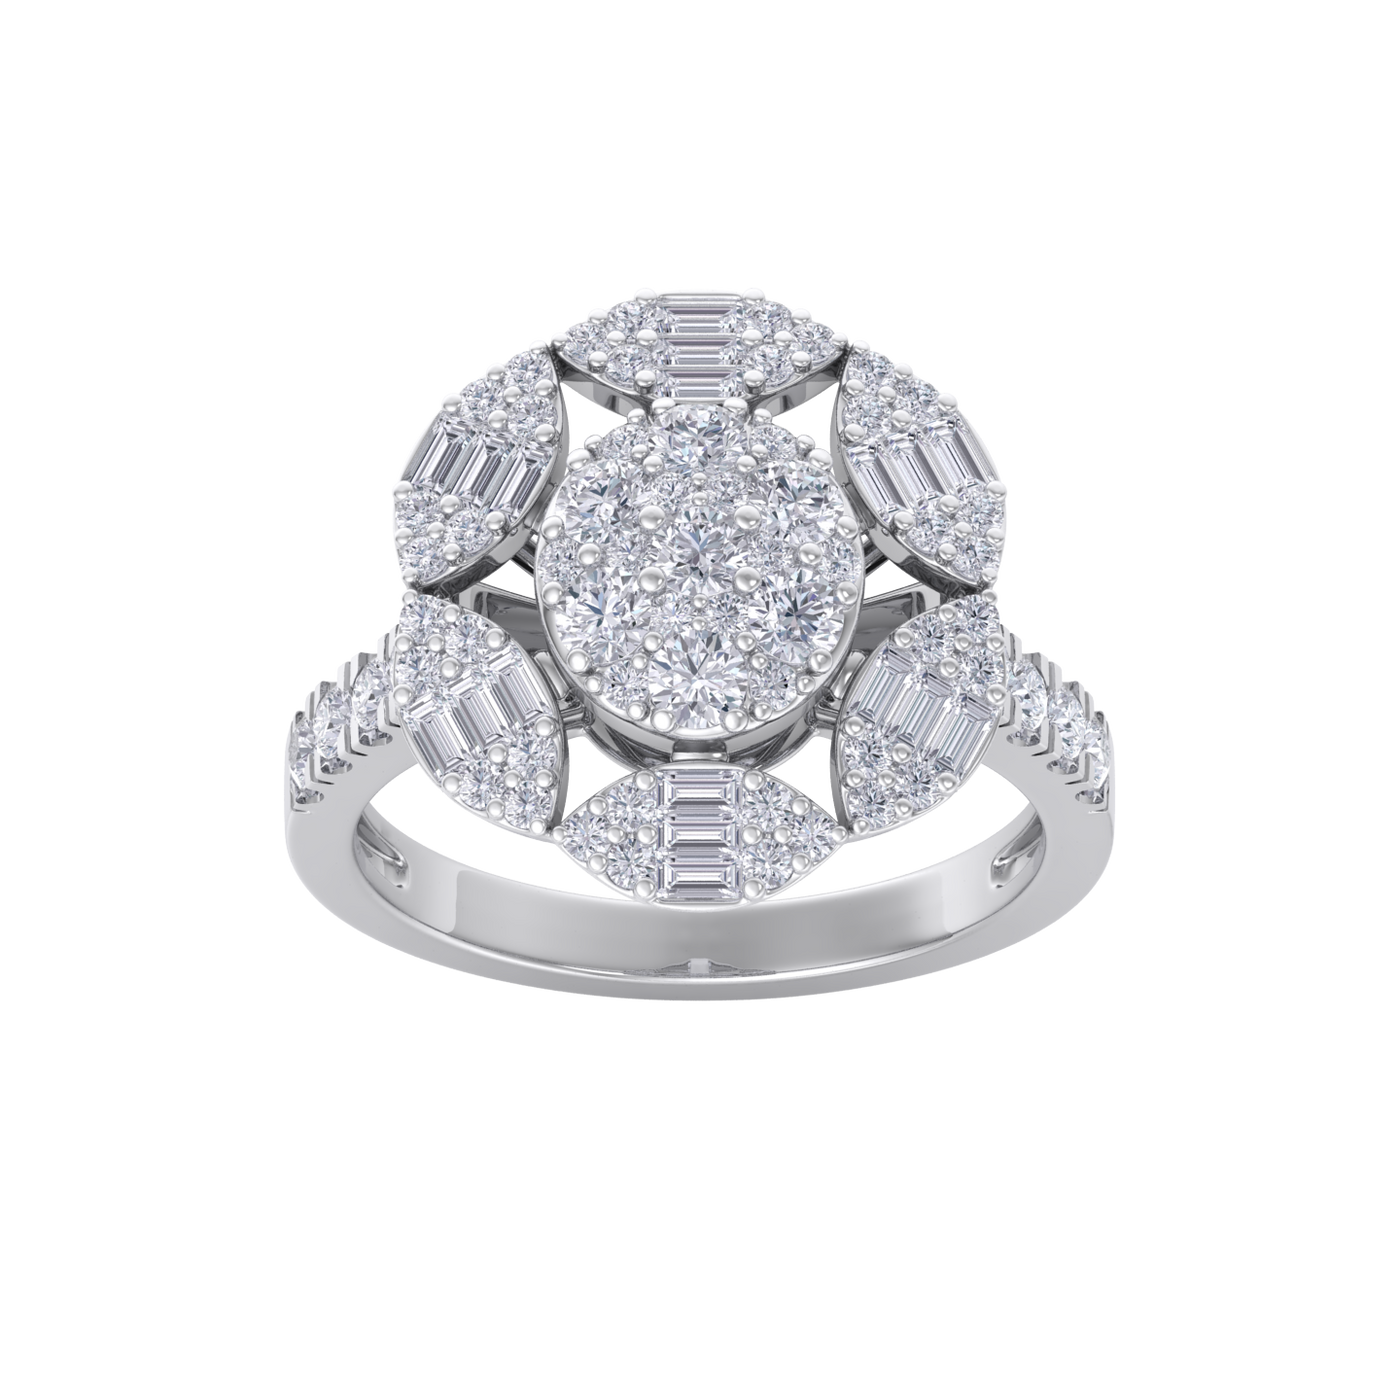 Diamond flower ring in yellow gold with white diamonds of 1.52 ct in weight